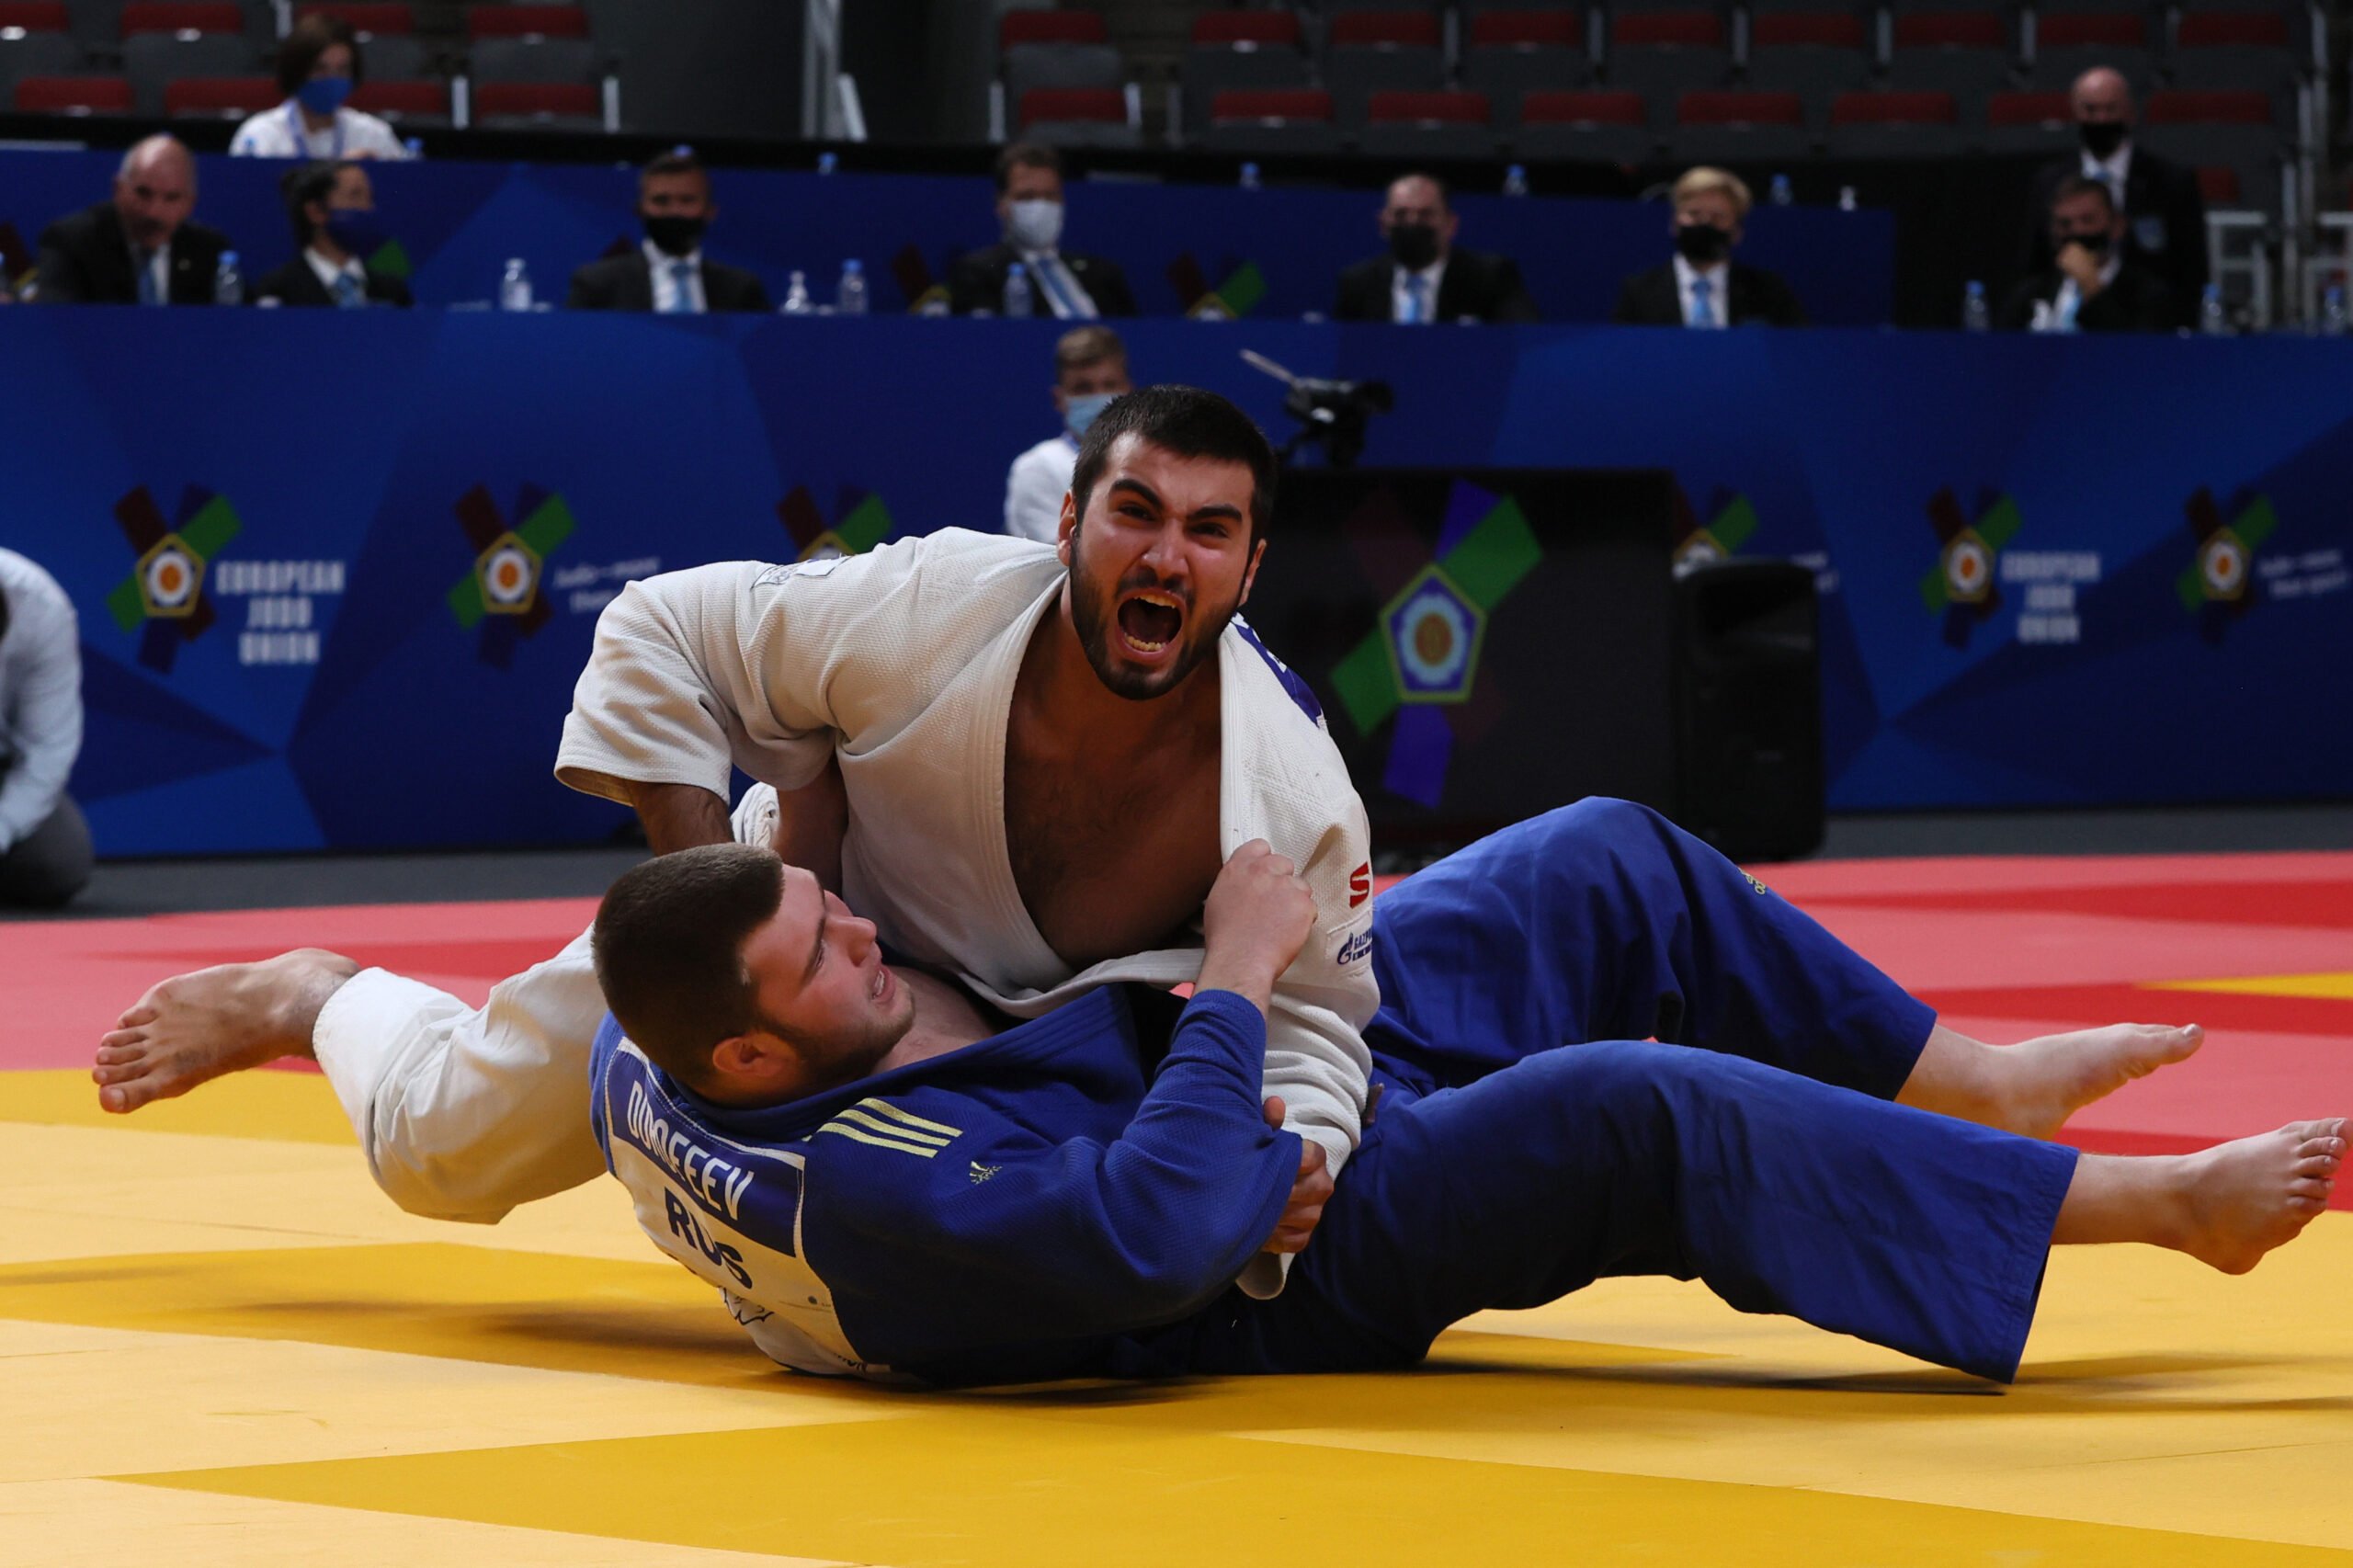 RUSSIA TOP MEDAL TALLY IN SUCCESSFUL CADET CONTINENTAL SHOWDOWN